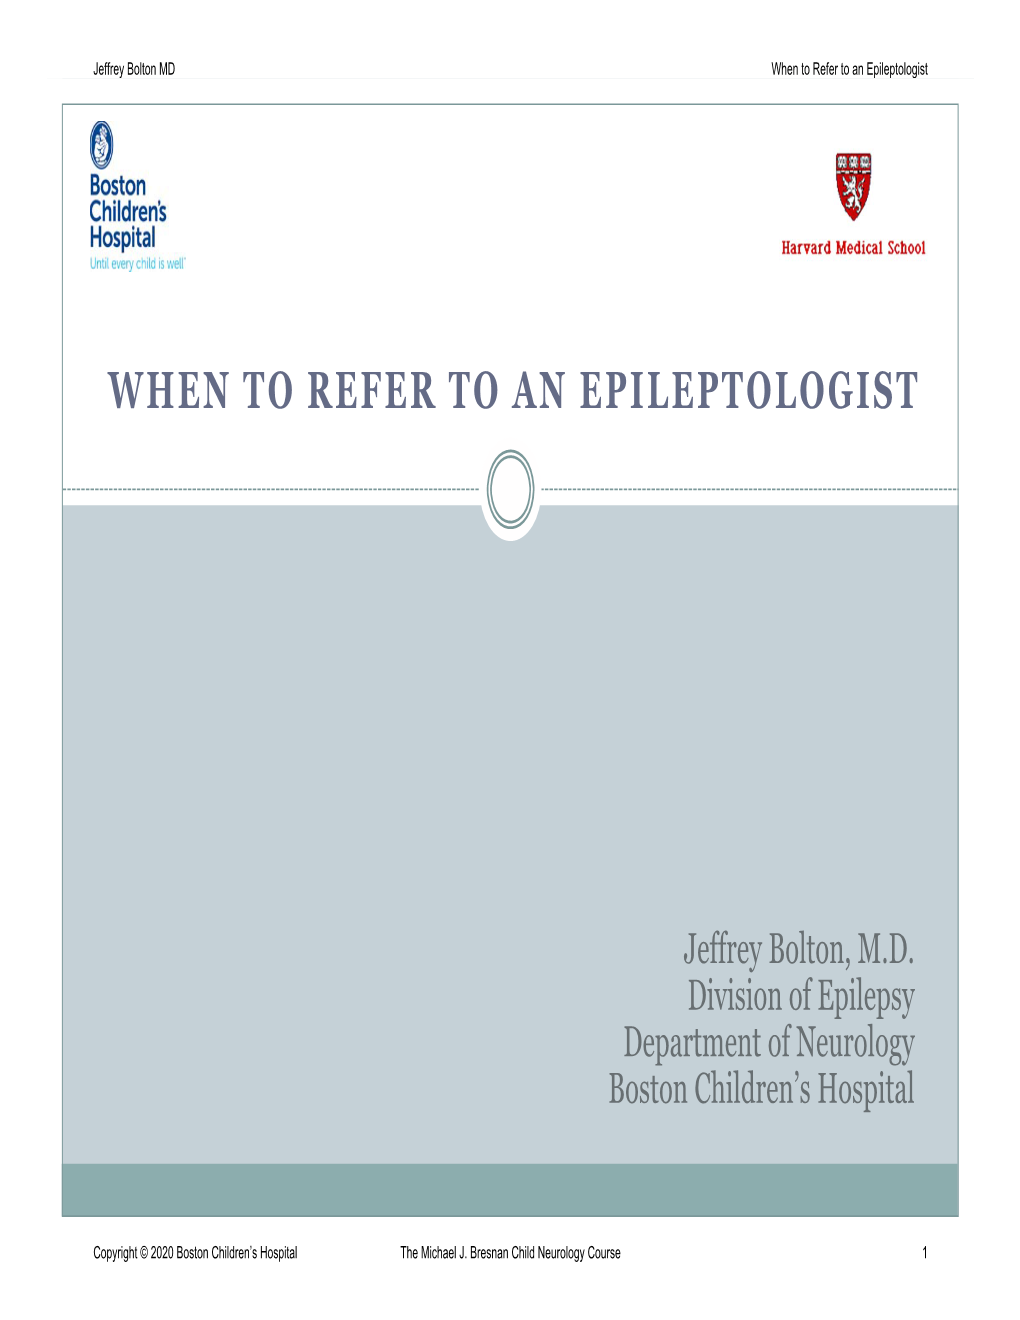 When to Refer to an Epileptologist